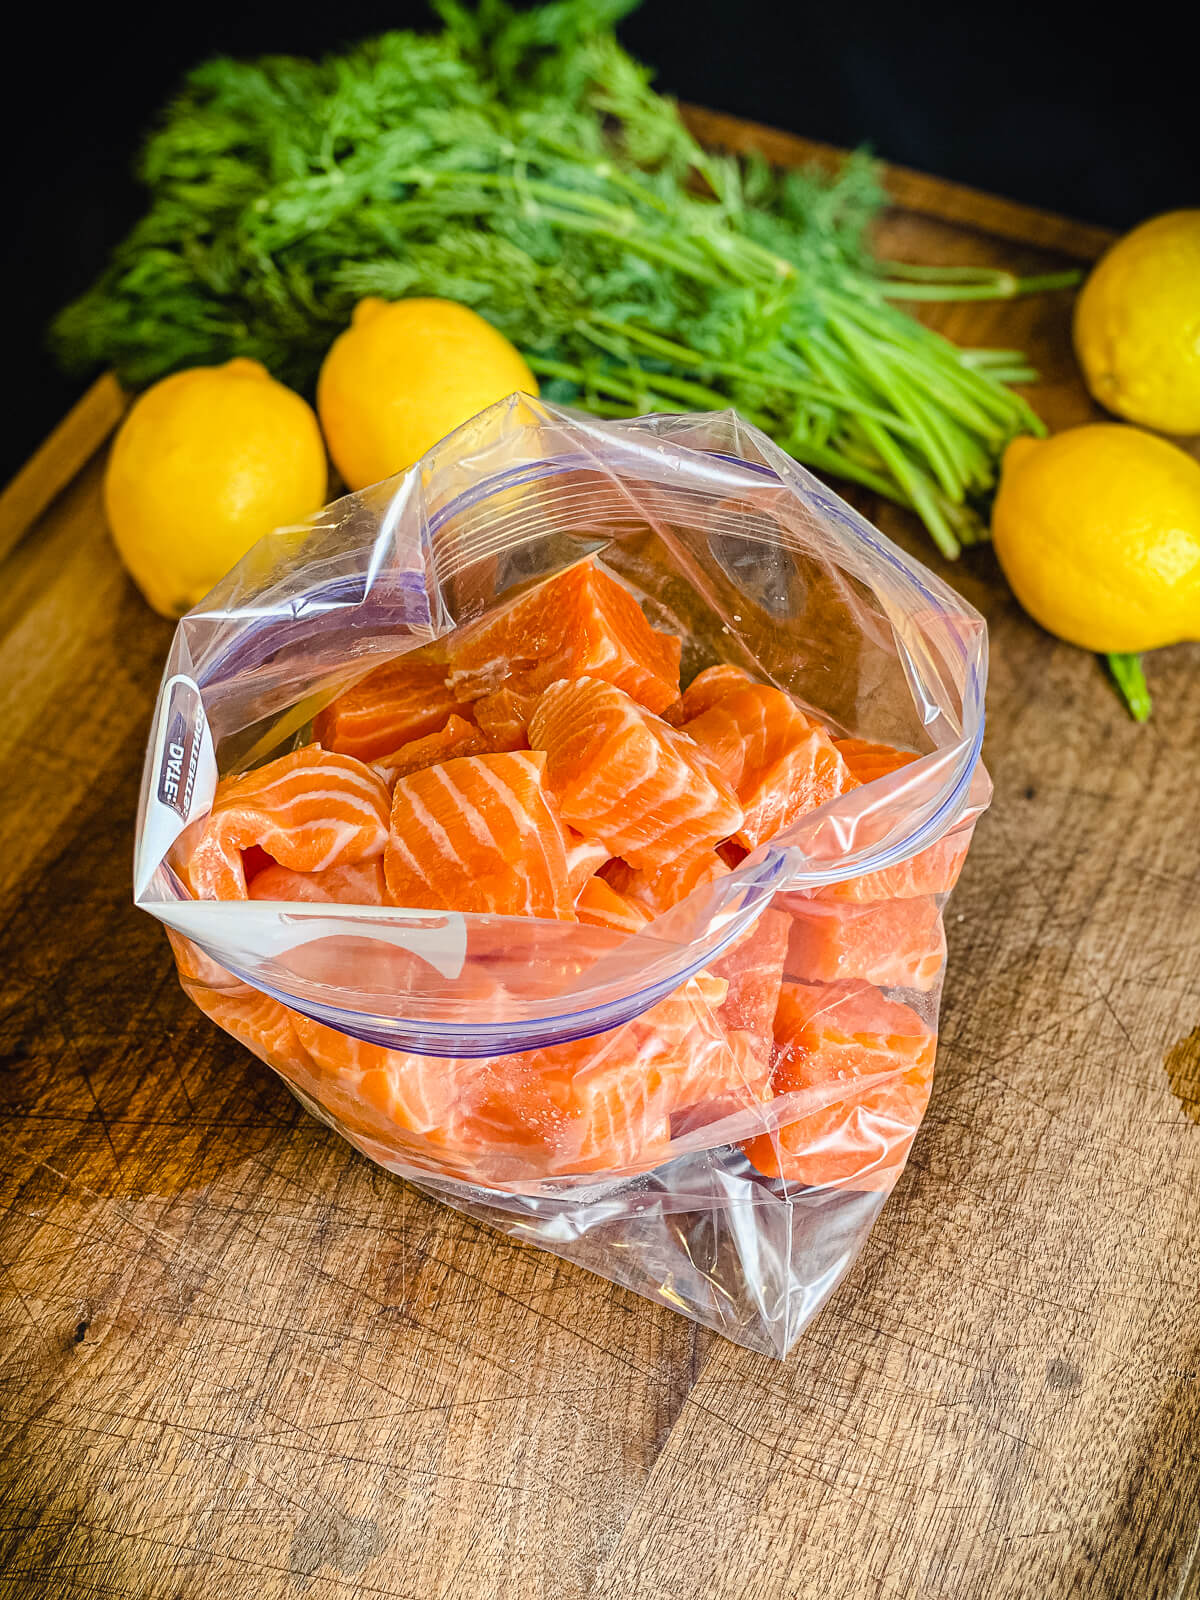 salmon in a bag for marinade to make salmon kabobs